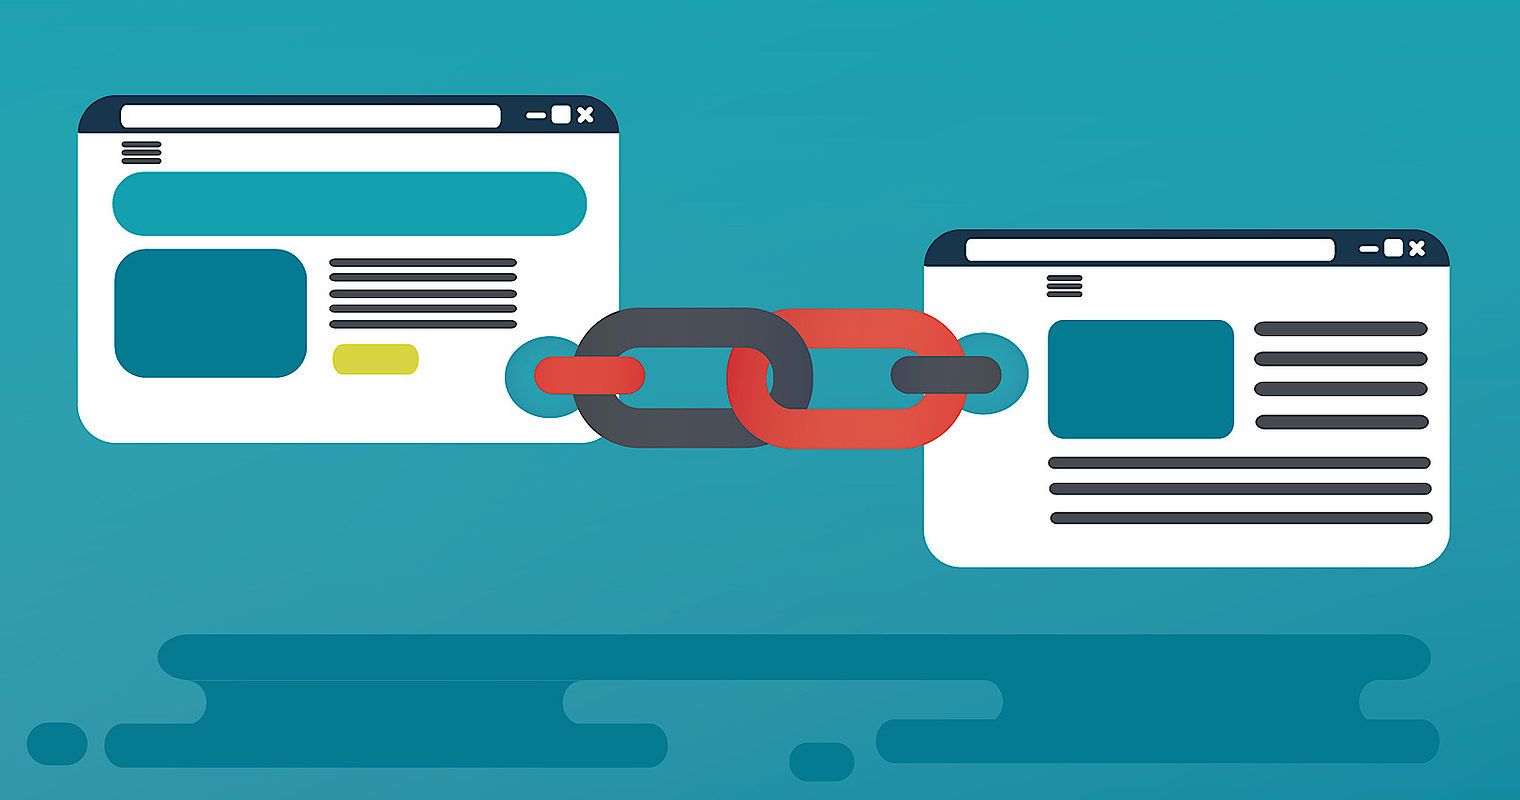 Shorter Content Earns the Most Backlinks, Study Says